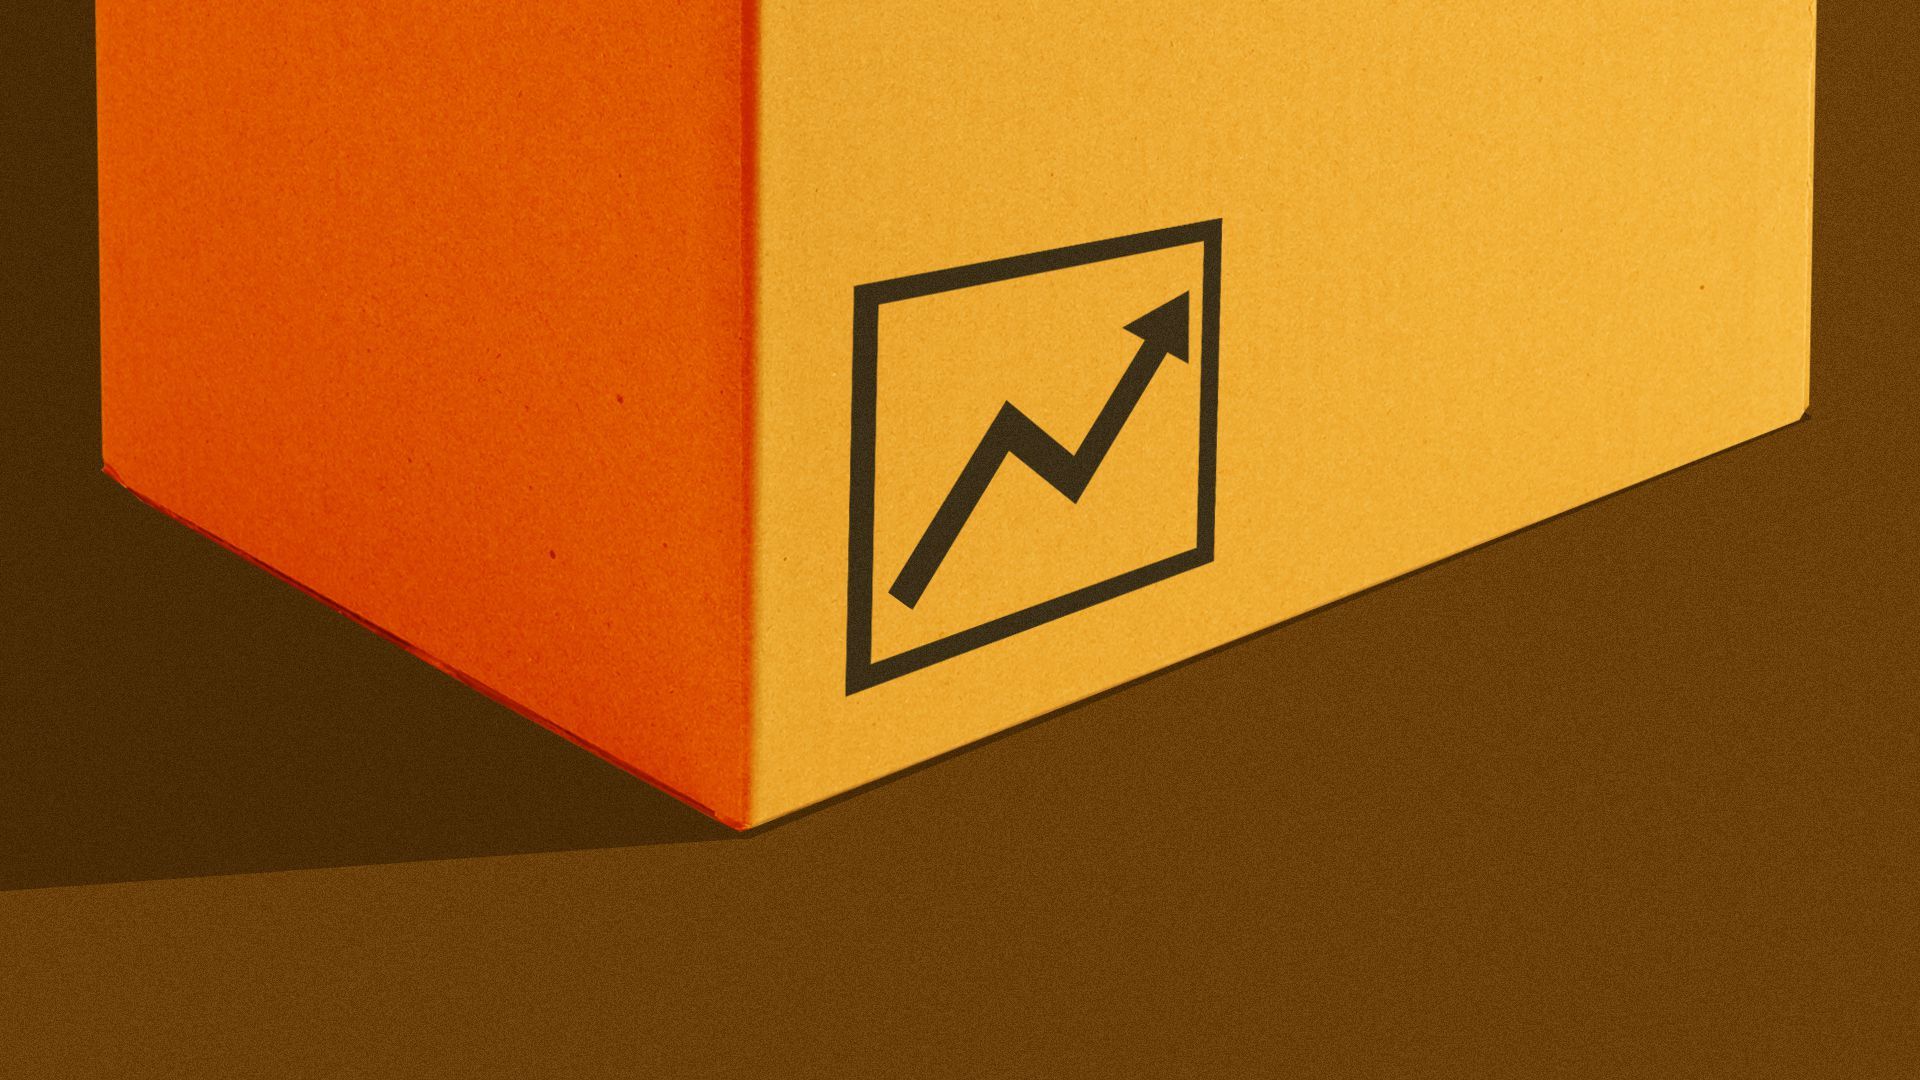 Illustration of a cardboard box with a package instruction icon in the form of an upward trend line